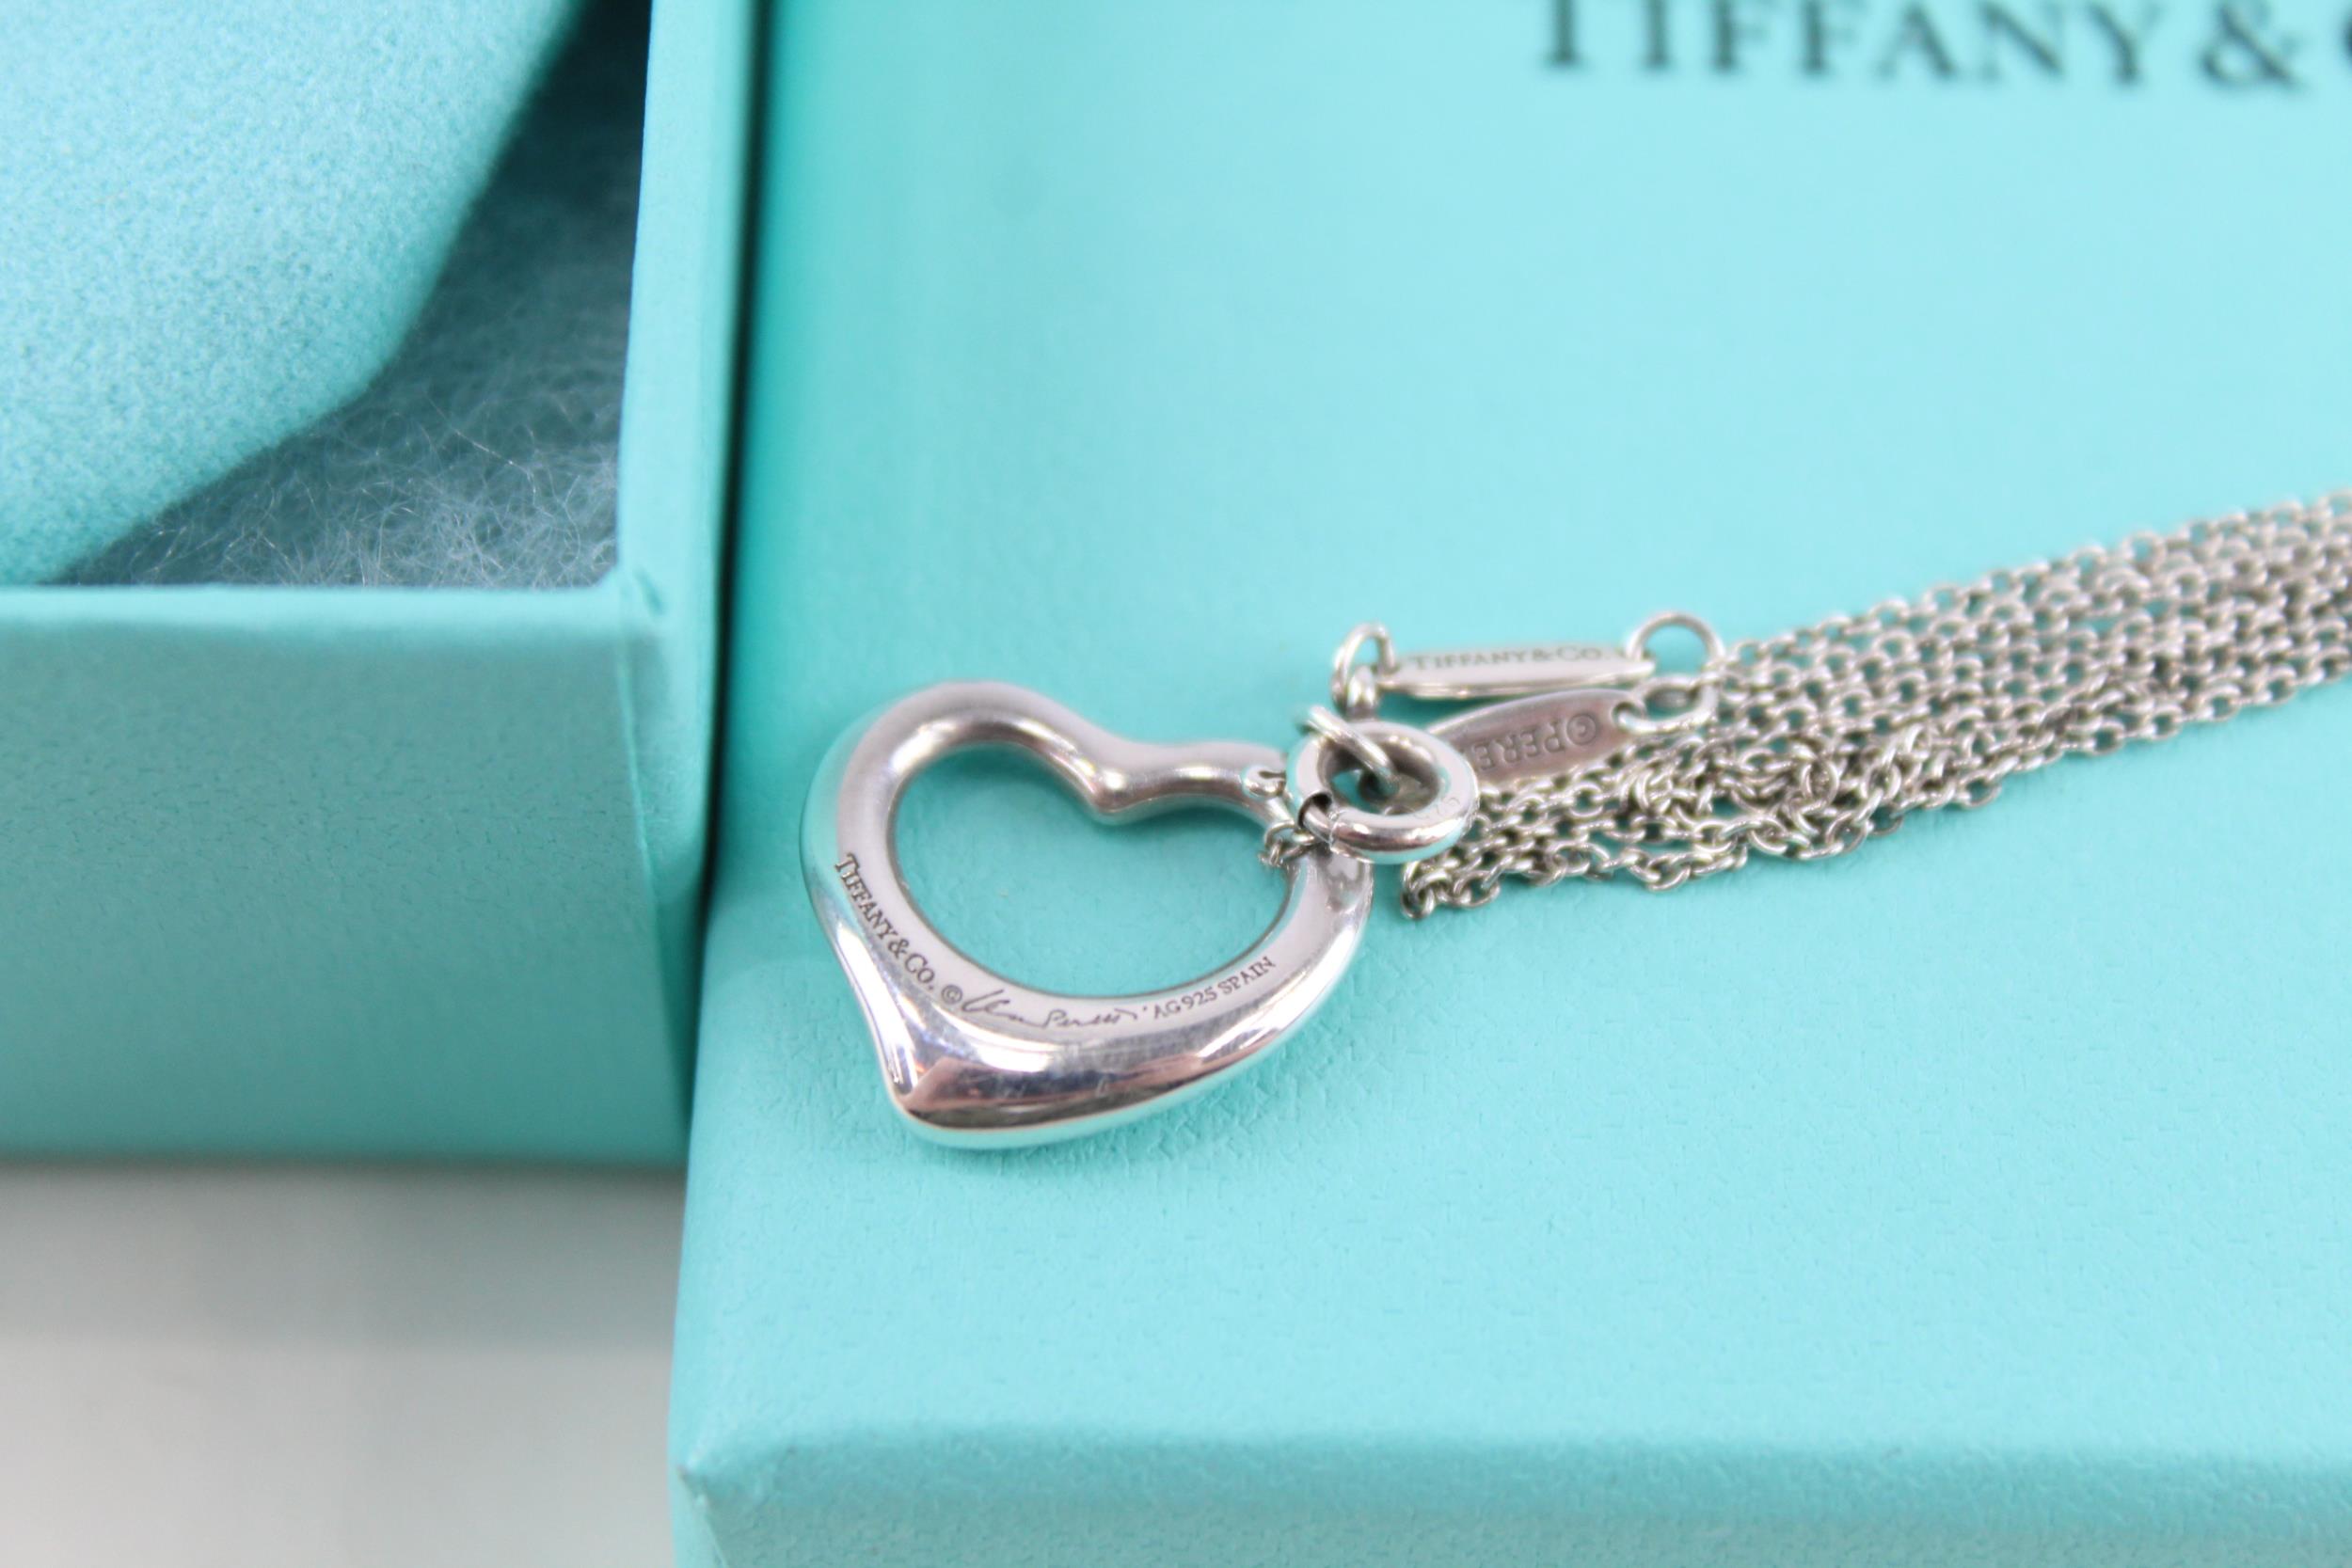 A silver heart pendant necklace by Elsa Peretti for Tiffany and Co (4g) - Image 2 of 5